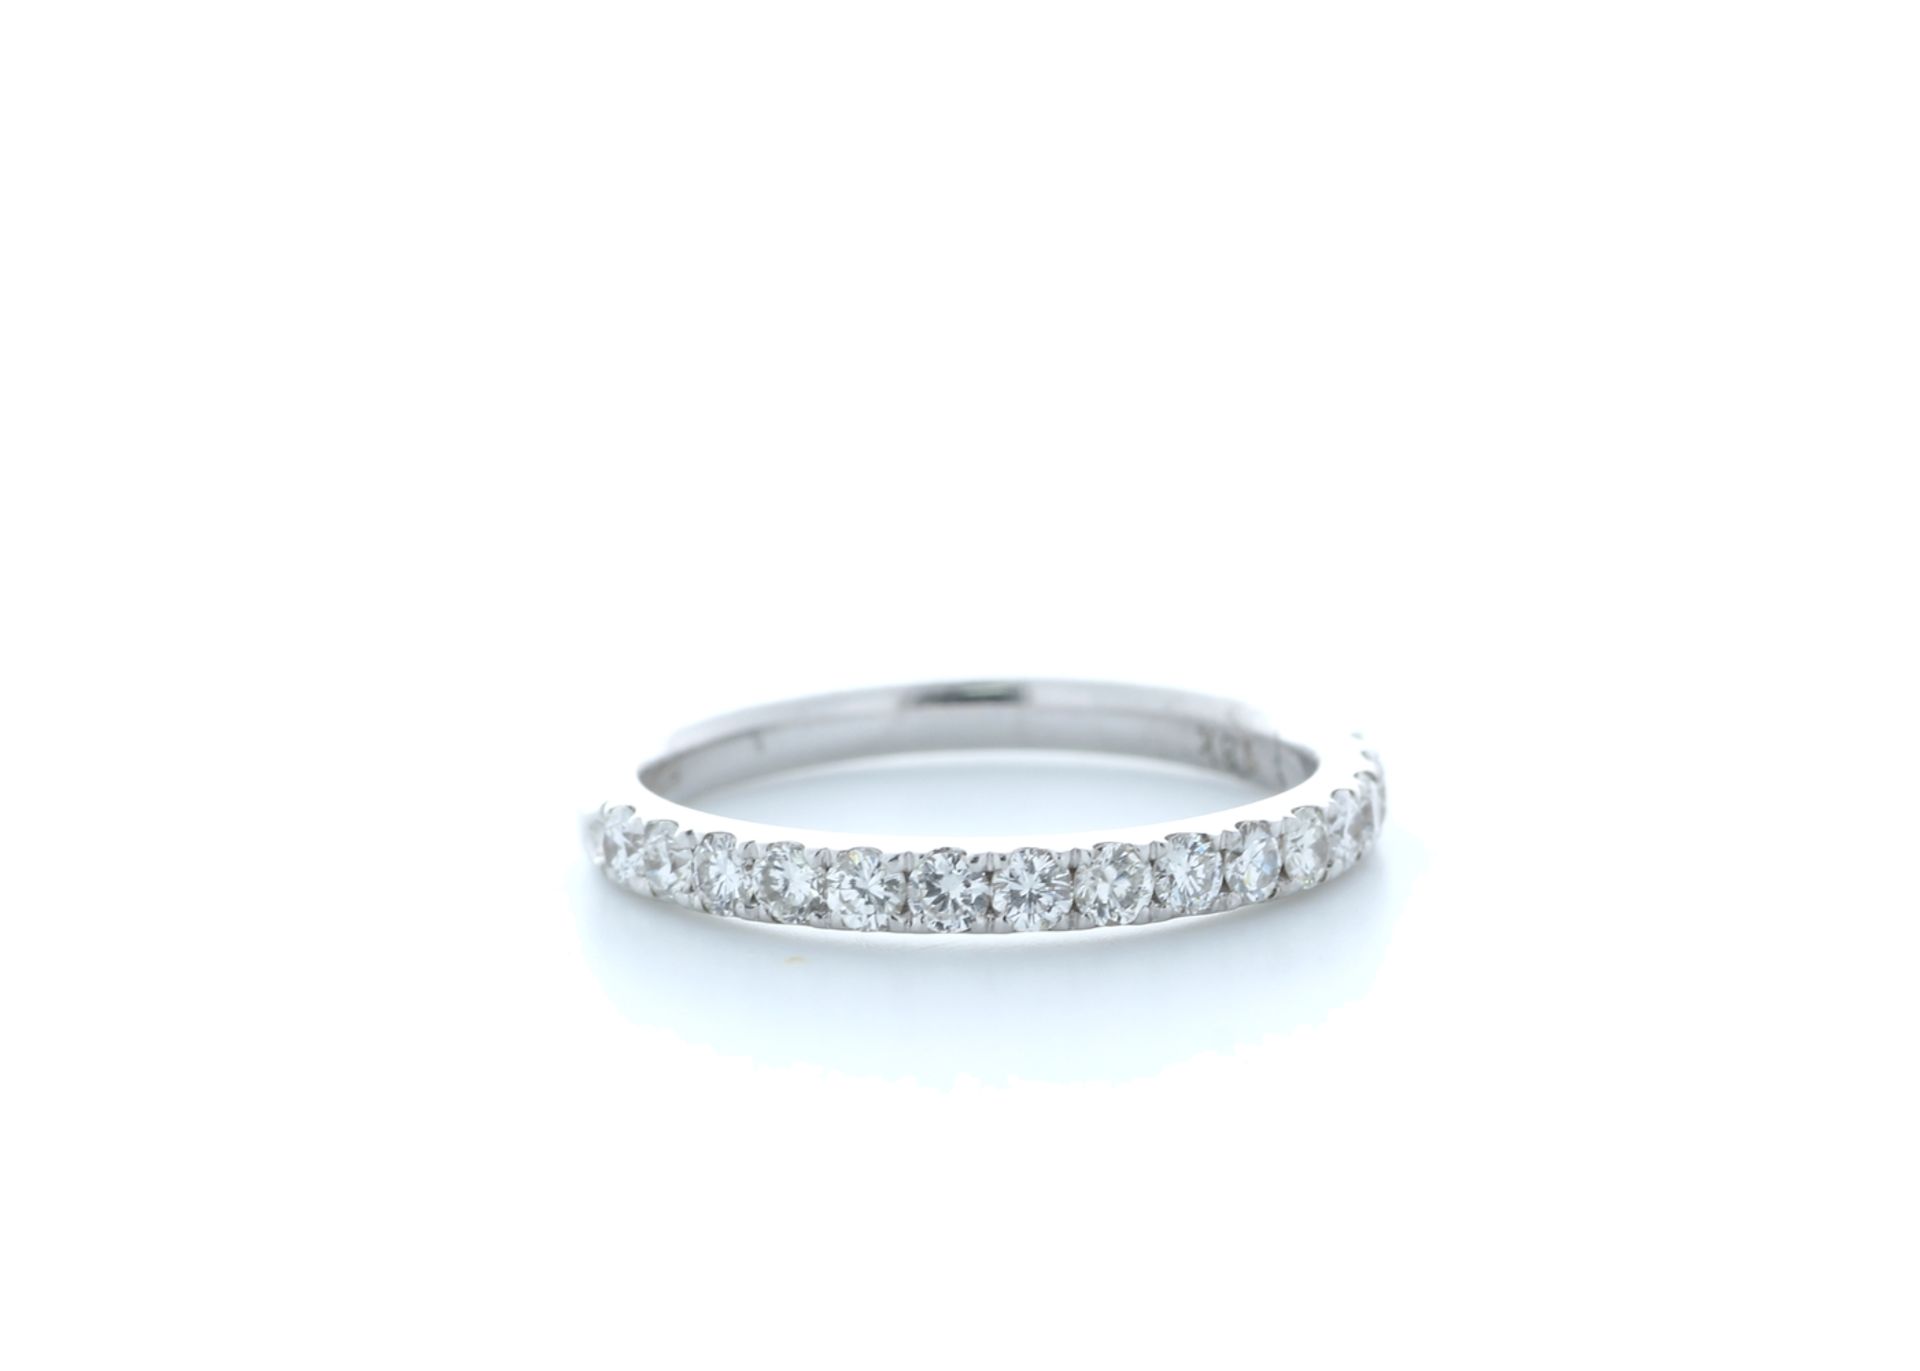 18ct White Gold Claw Set Semi Eternity Diamond Ring 0.32 Carats - Valued by IDI £2,750.00 - 18ct